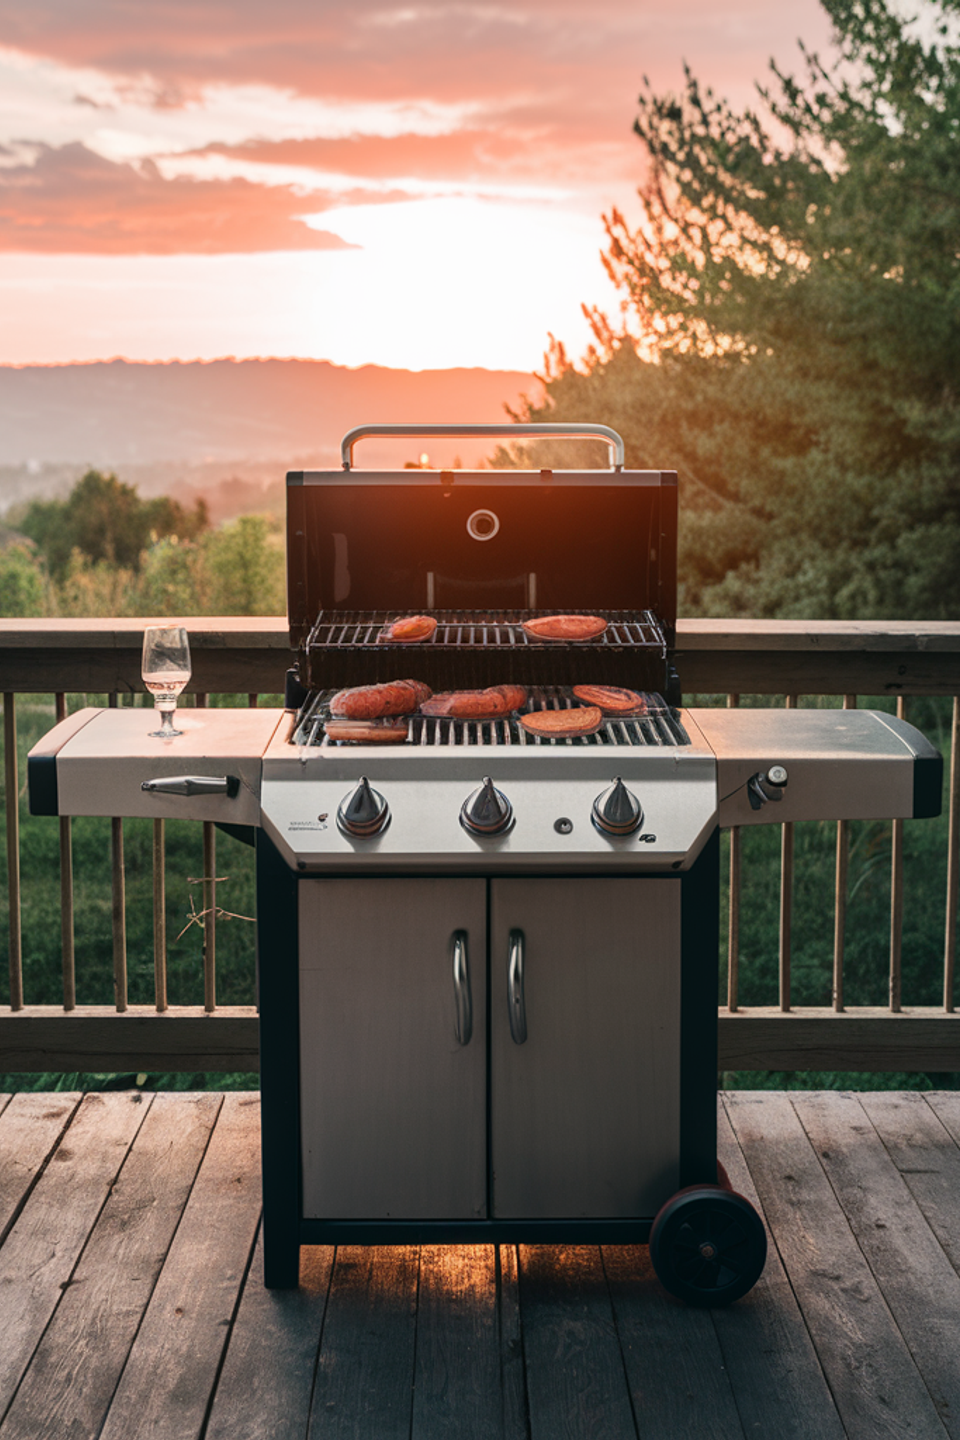 Propane grill on balcony with sunset view, cooking steaks and sausages, perfect for outdoor dining and entertaining